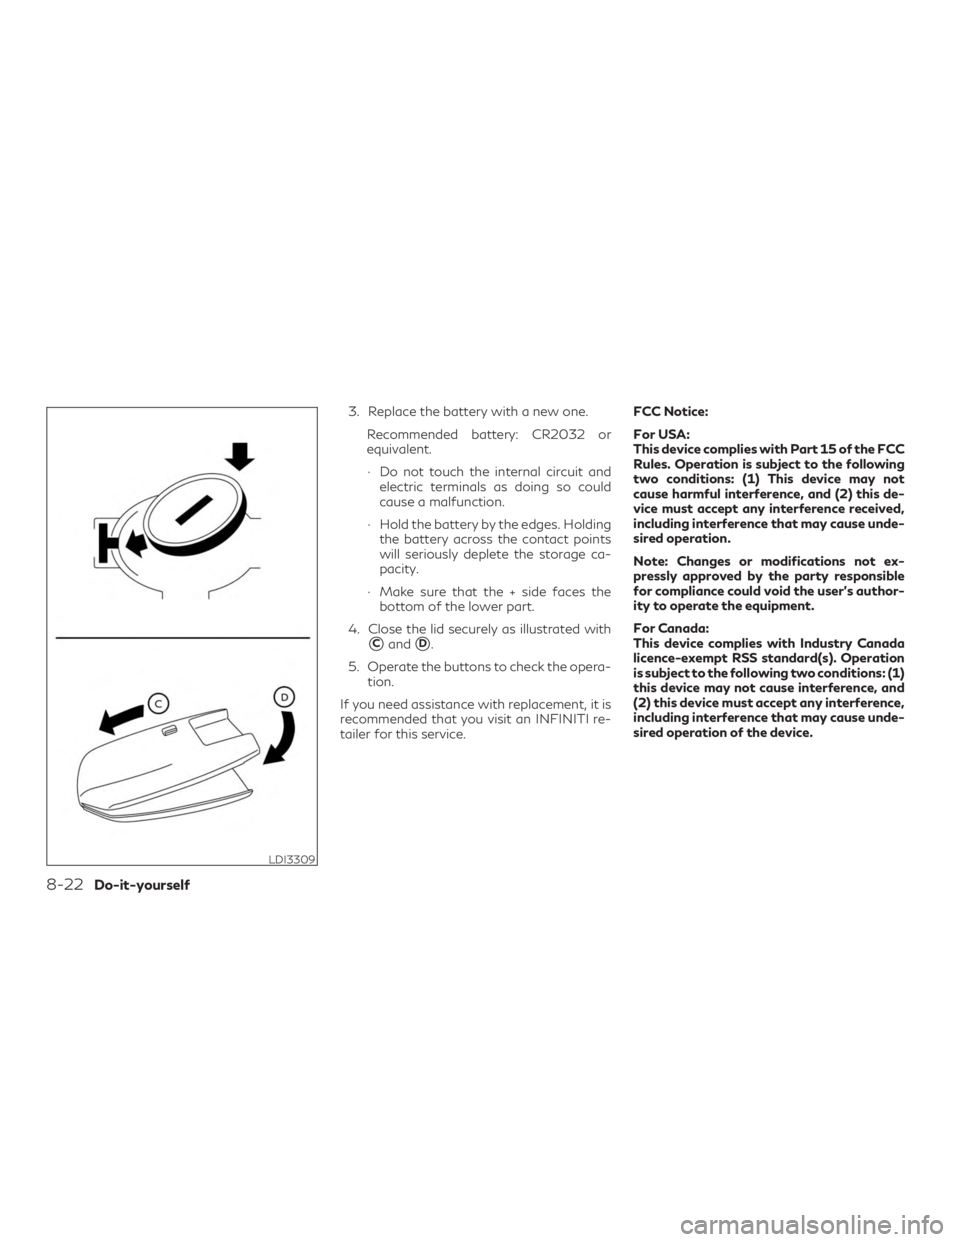 INFINITI QX50 2020  Owners Manual 3. Replace the battery with a new one.Recommended battery: CR2032 or
equivalent.
∙ Do not touch the internal circuit andelectric terminals as doing so could
cause a malfunction.
∙ Hold the battery